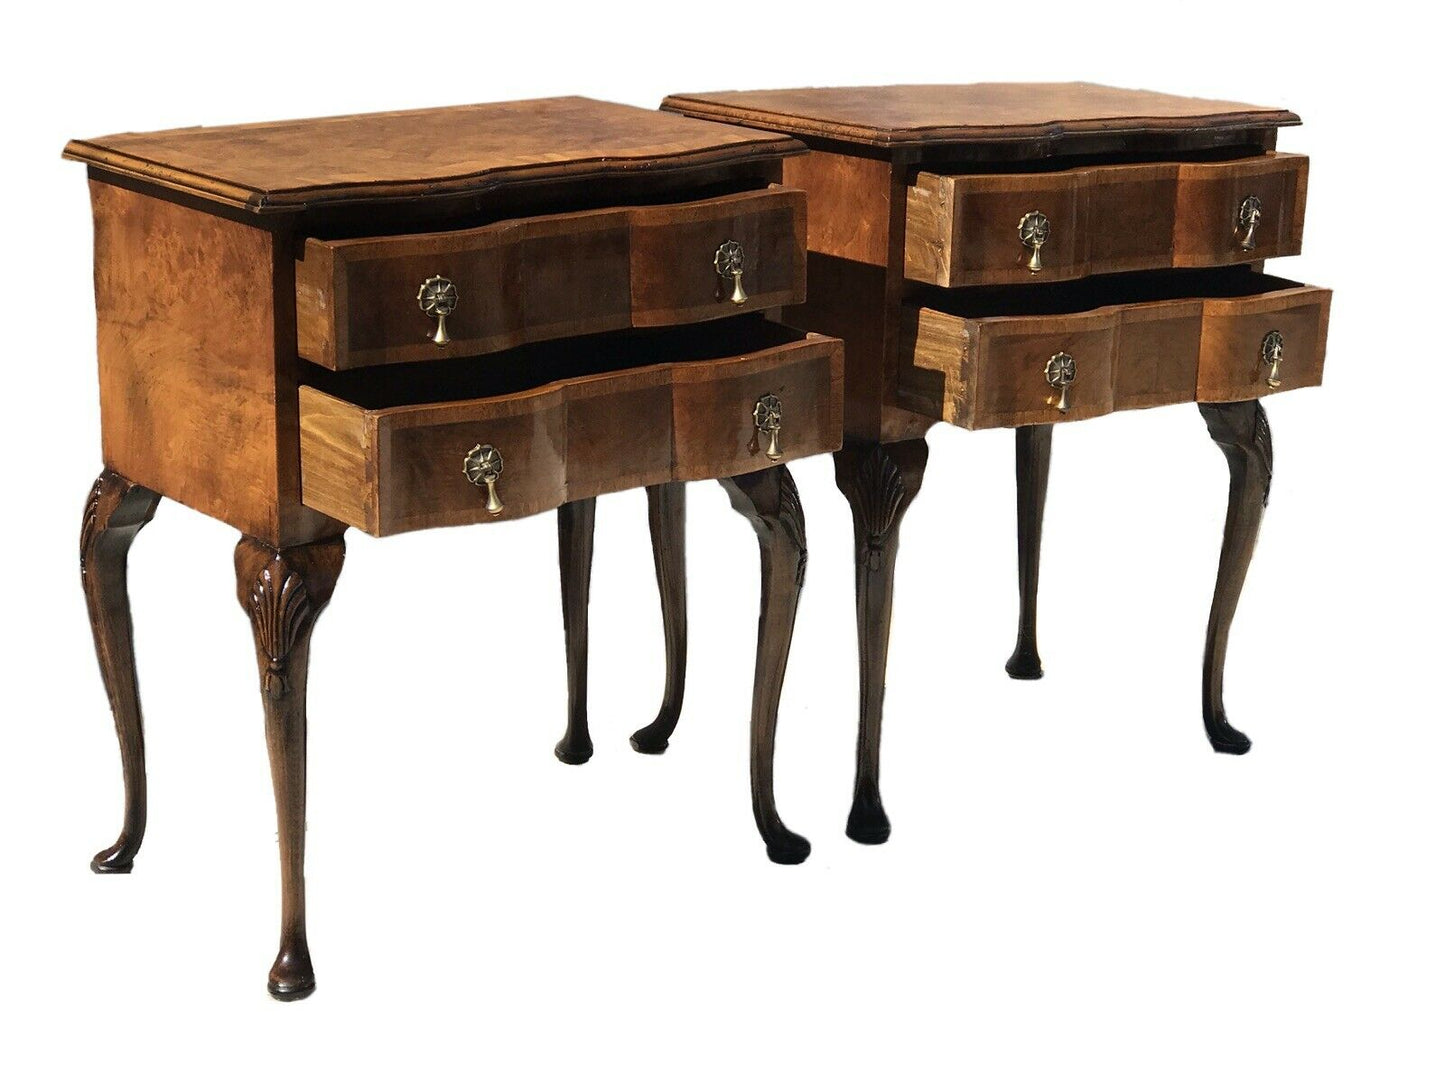 EARLY 20TH C GEORGIAN ANTIQUE STYLE INLAID PARQUETRY NIGHT STANDS